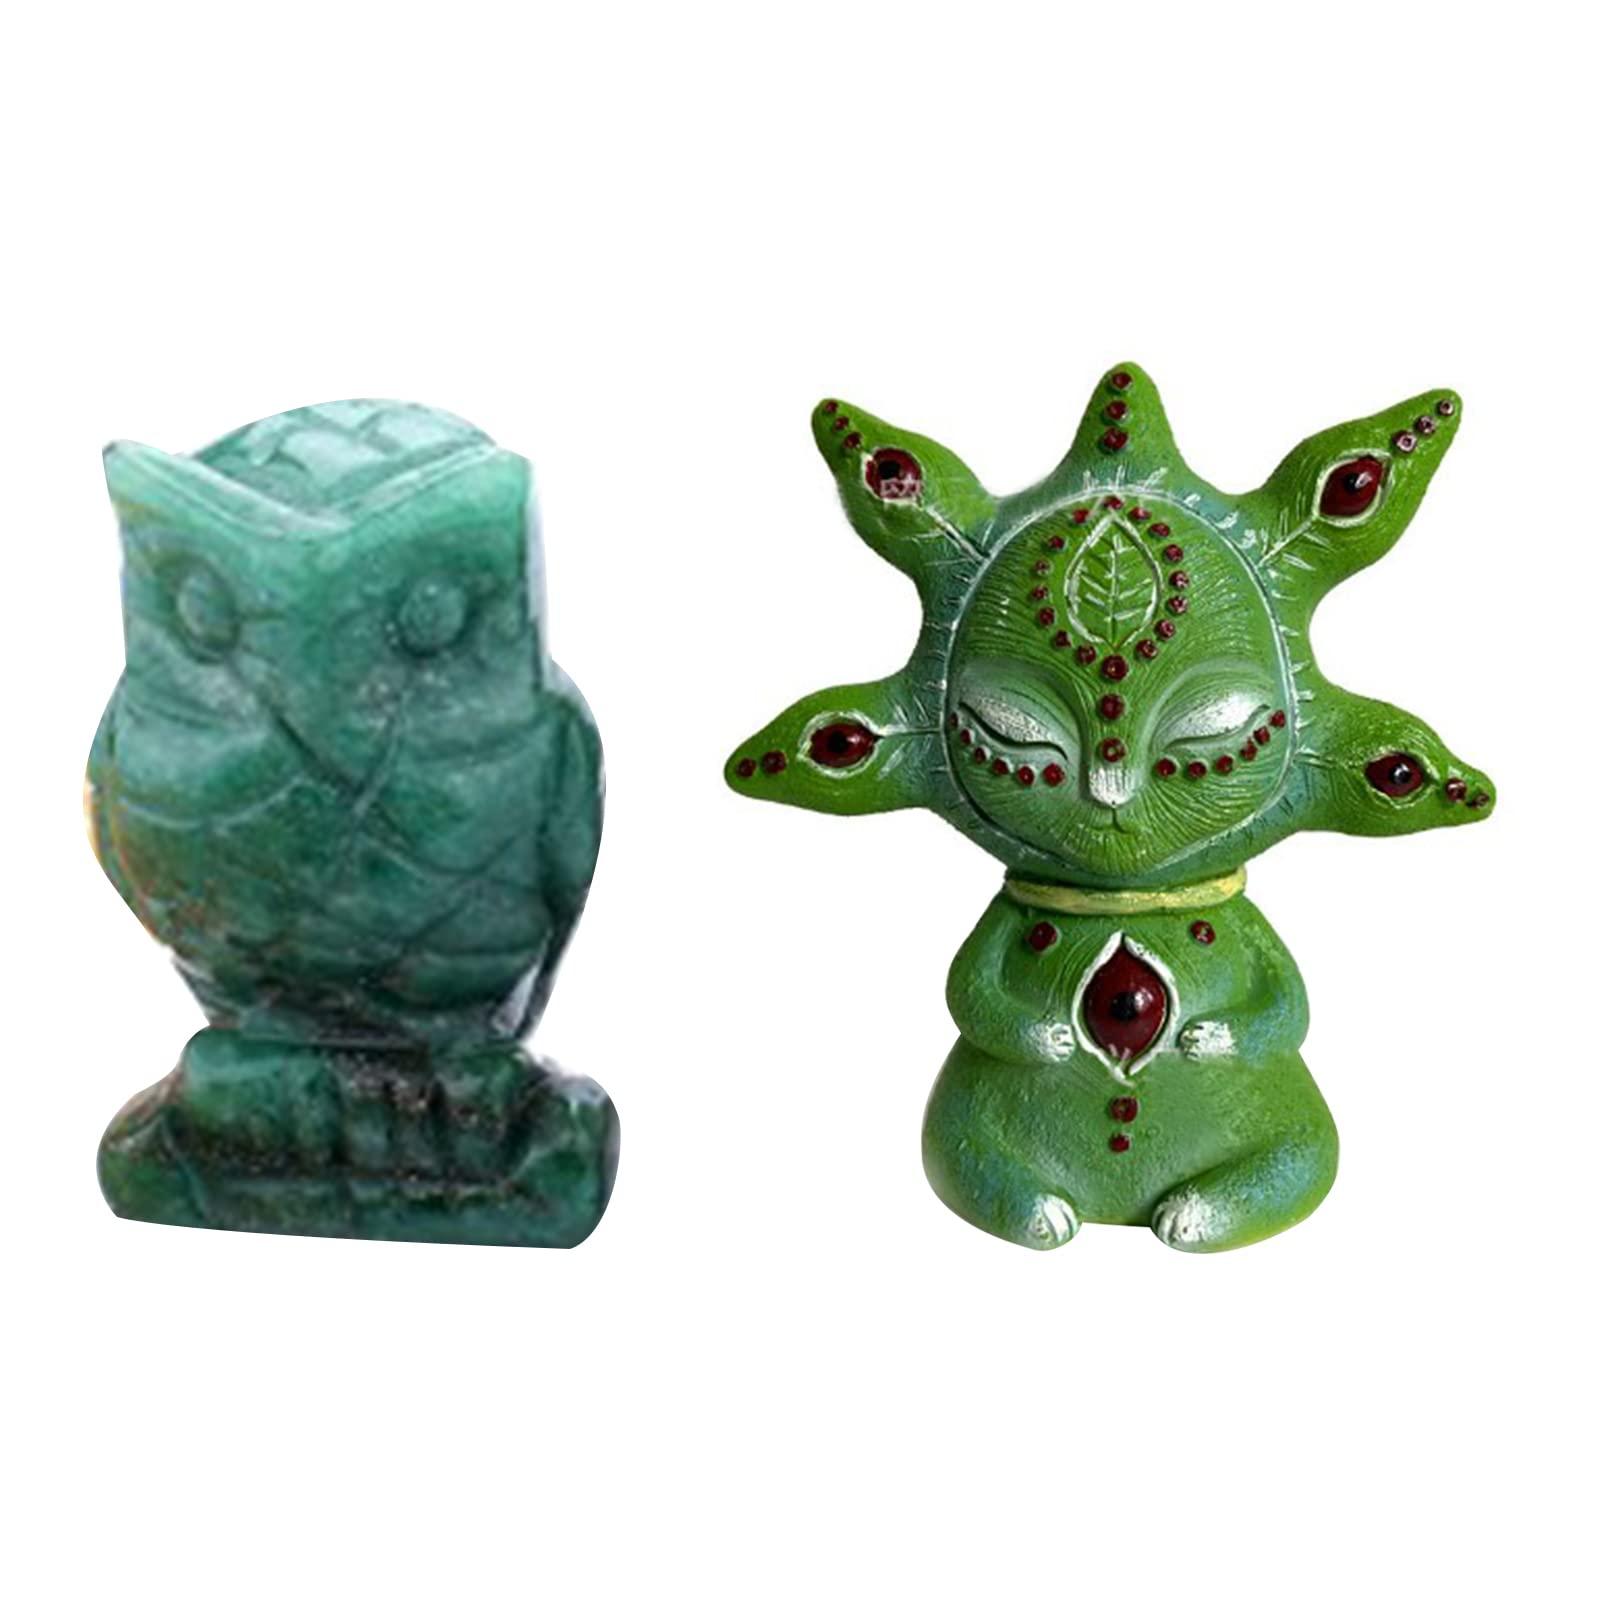 Soulnioi Three-Eyed Cartoon Alien Outdoor Garden Figurine Ornaments Resin Ornaments and Green Crystal Carved Owl Carving Ornament, Home Outdoor Decoration Figurines Gift